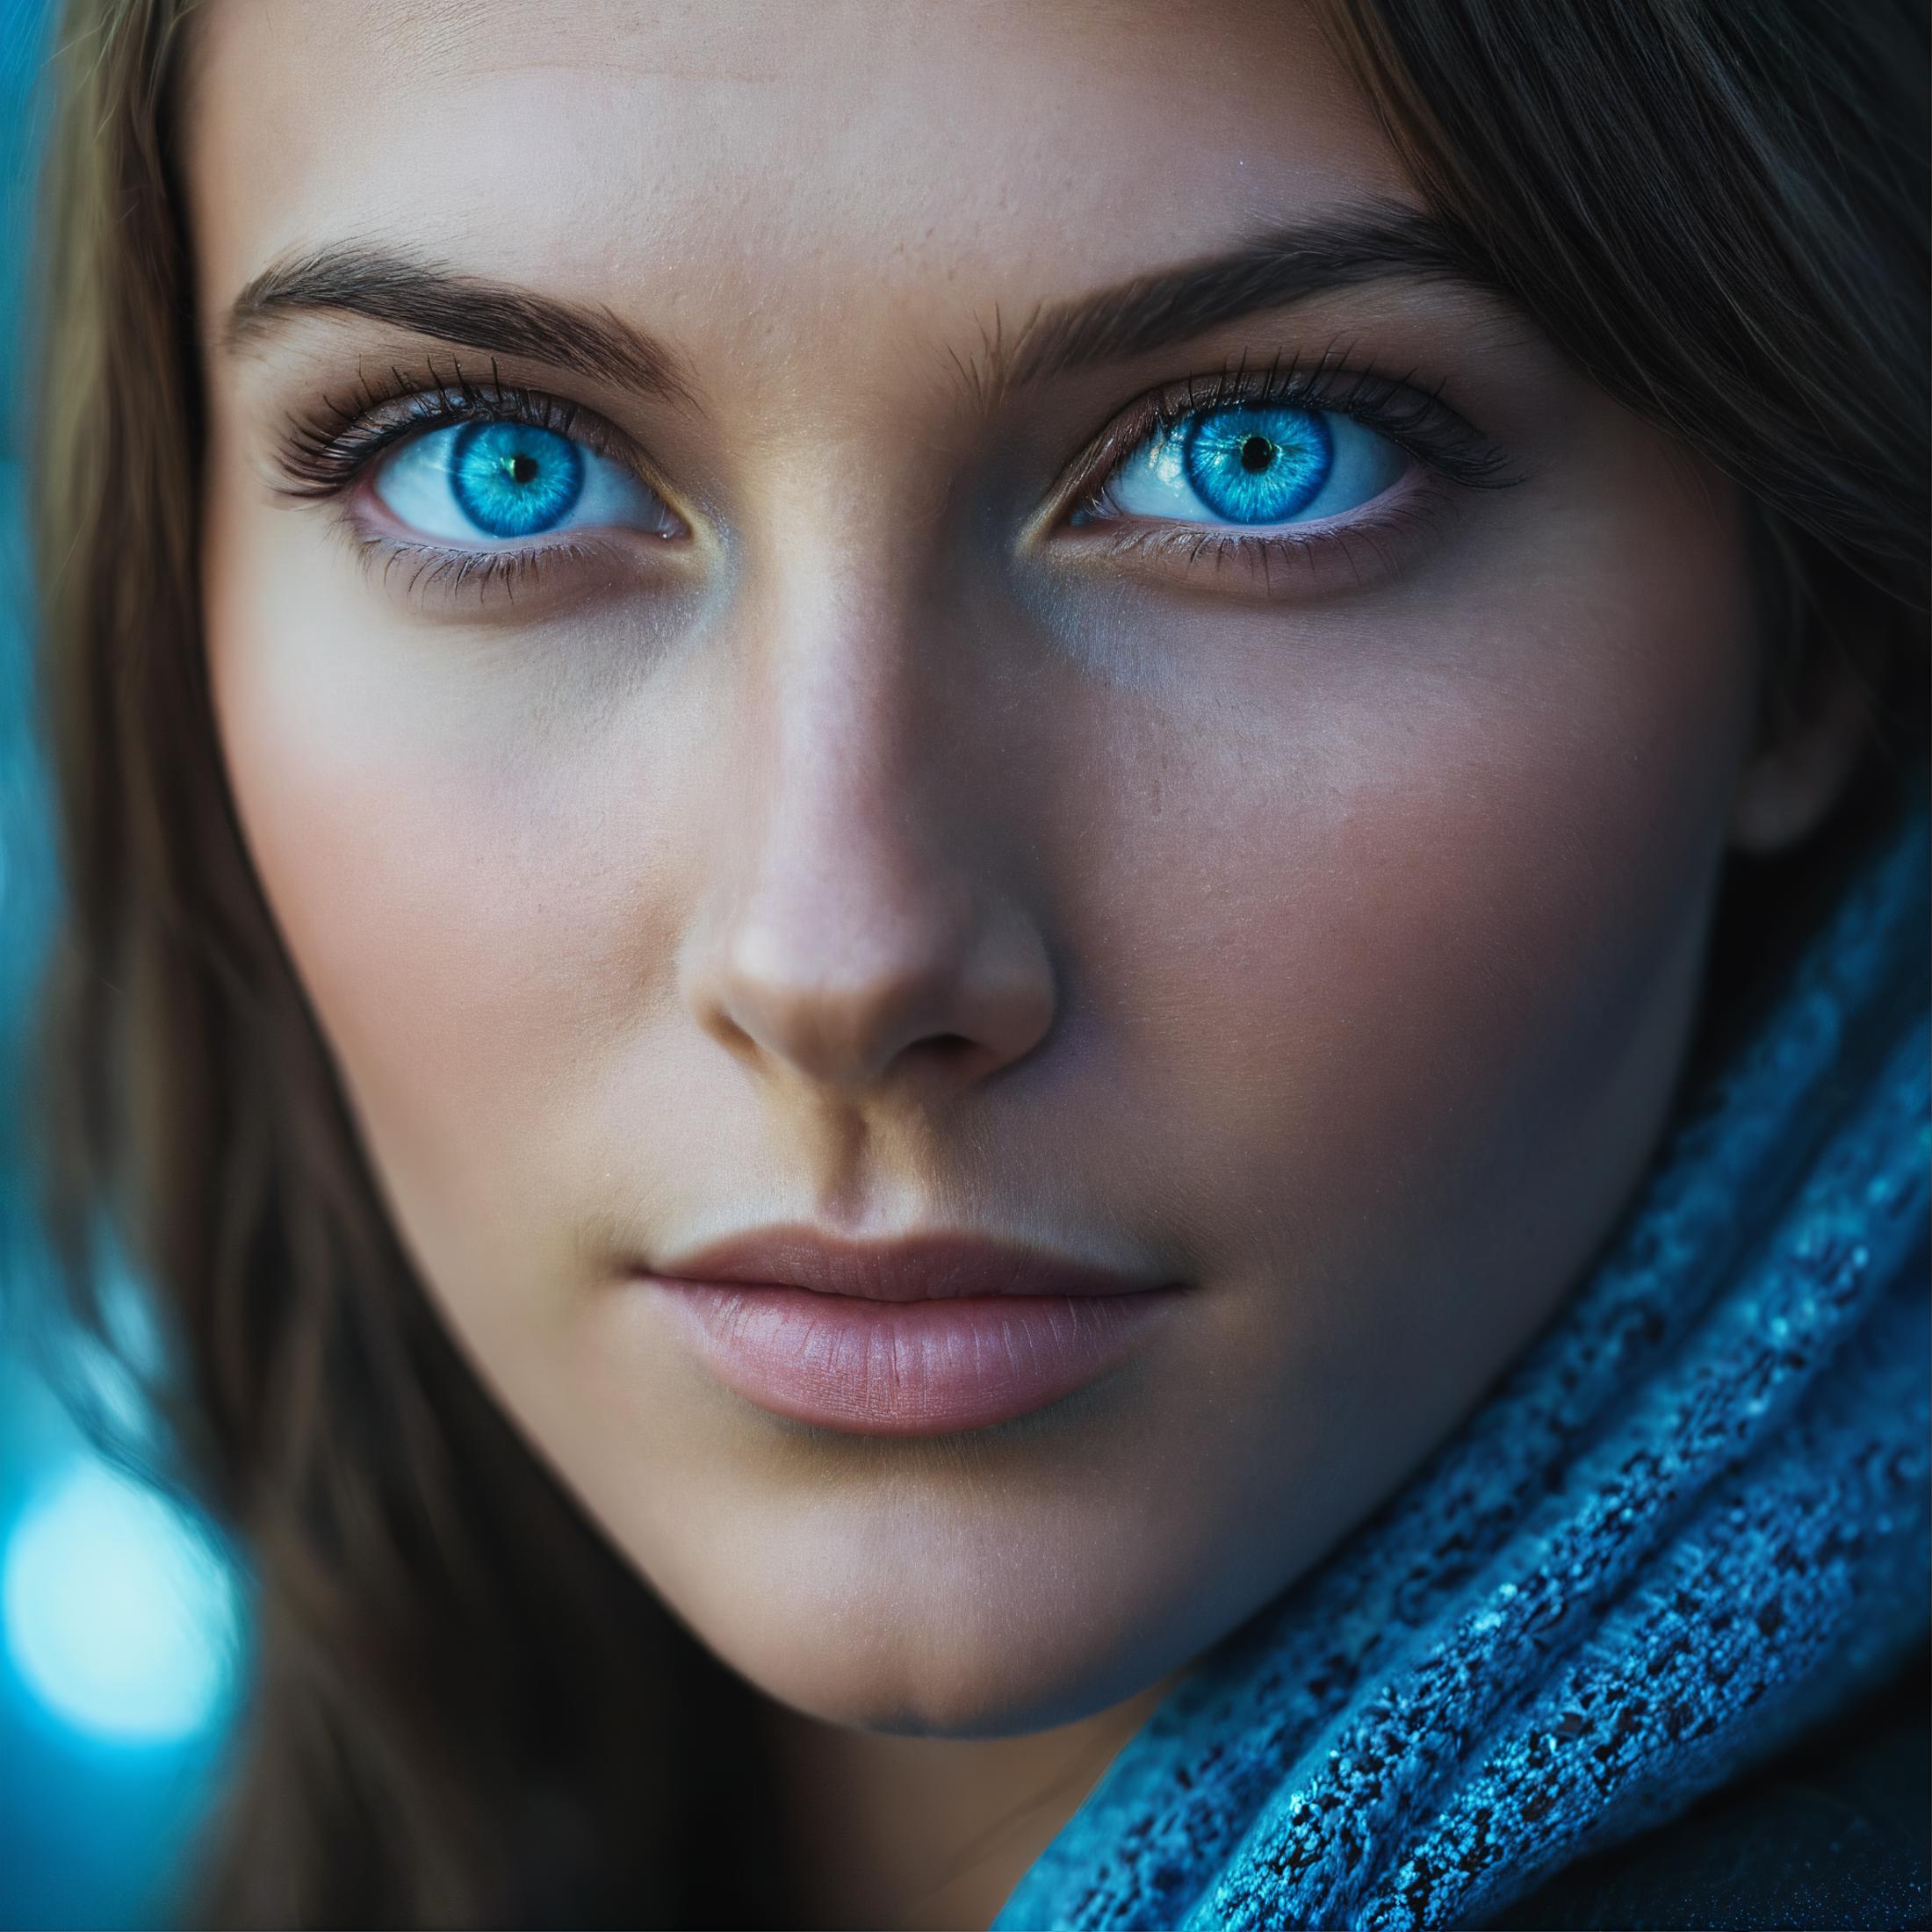 A young woman with blue eyes and a blue scarf.